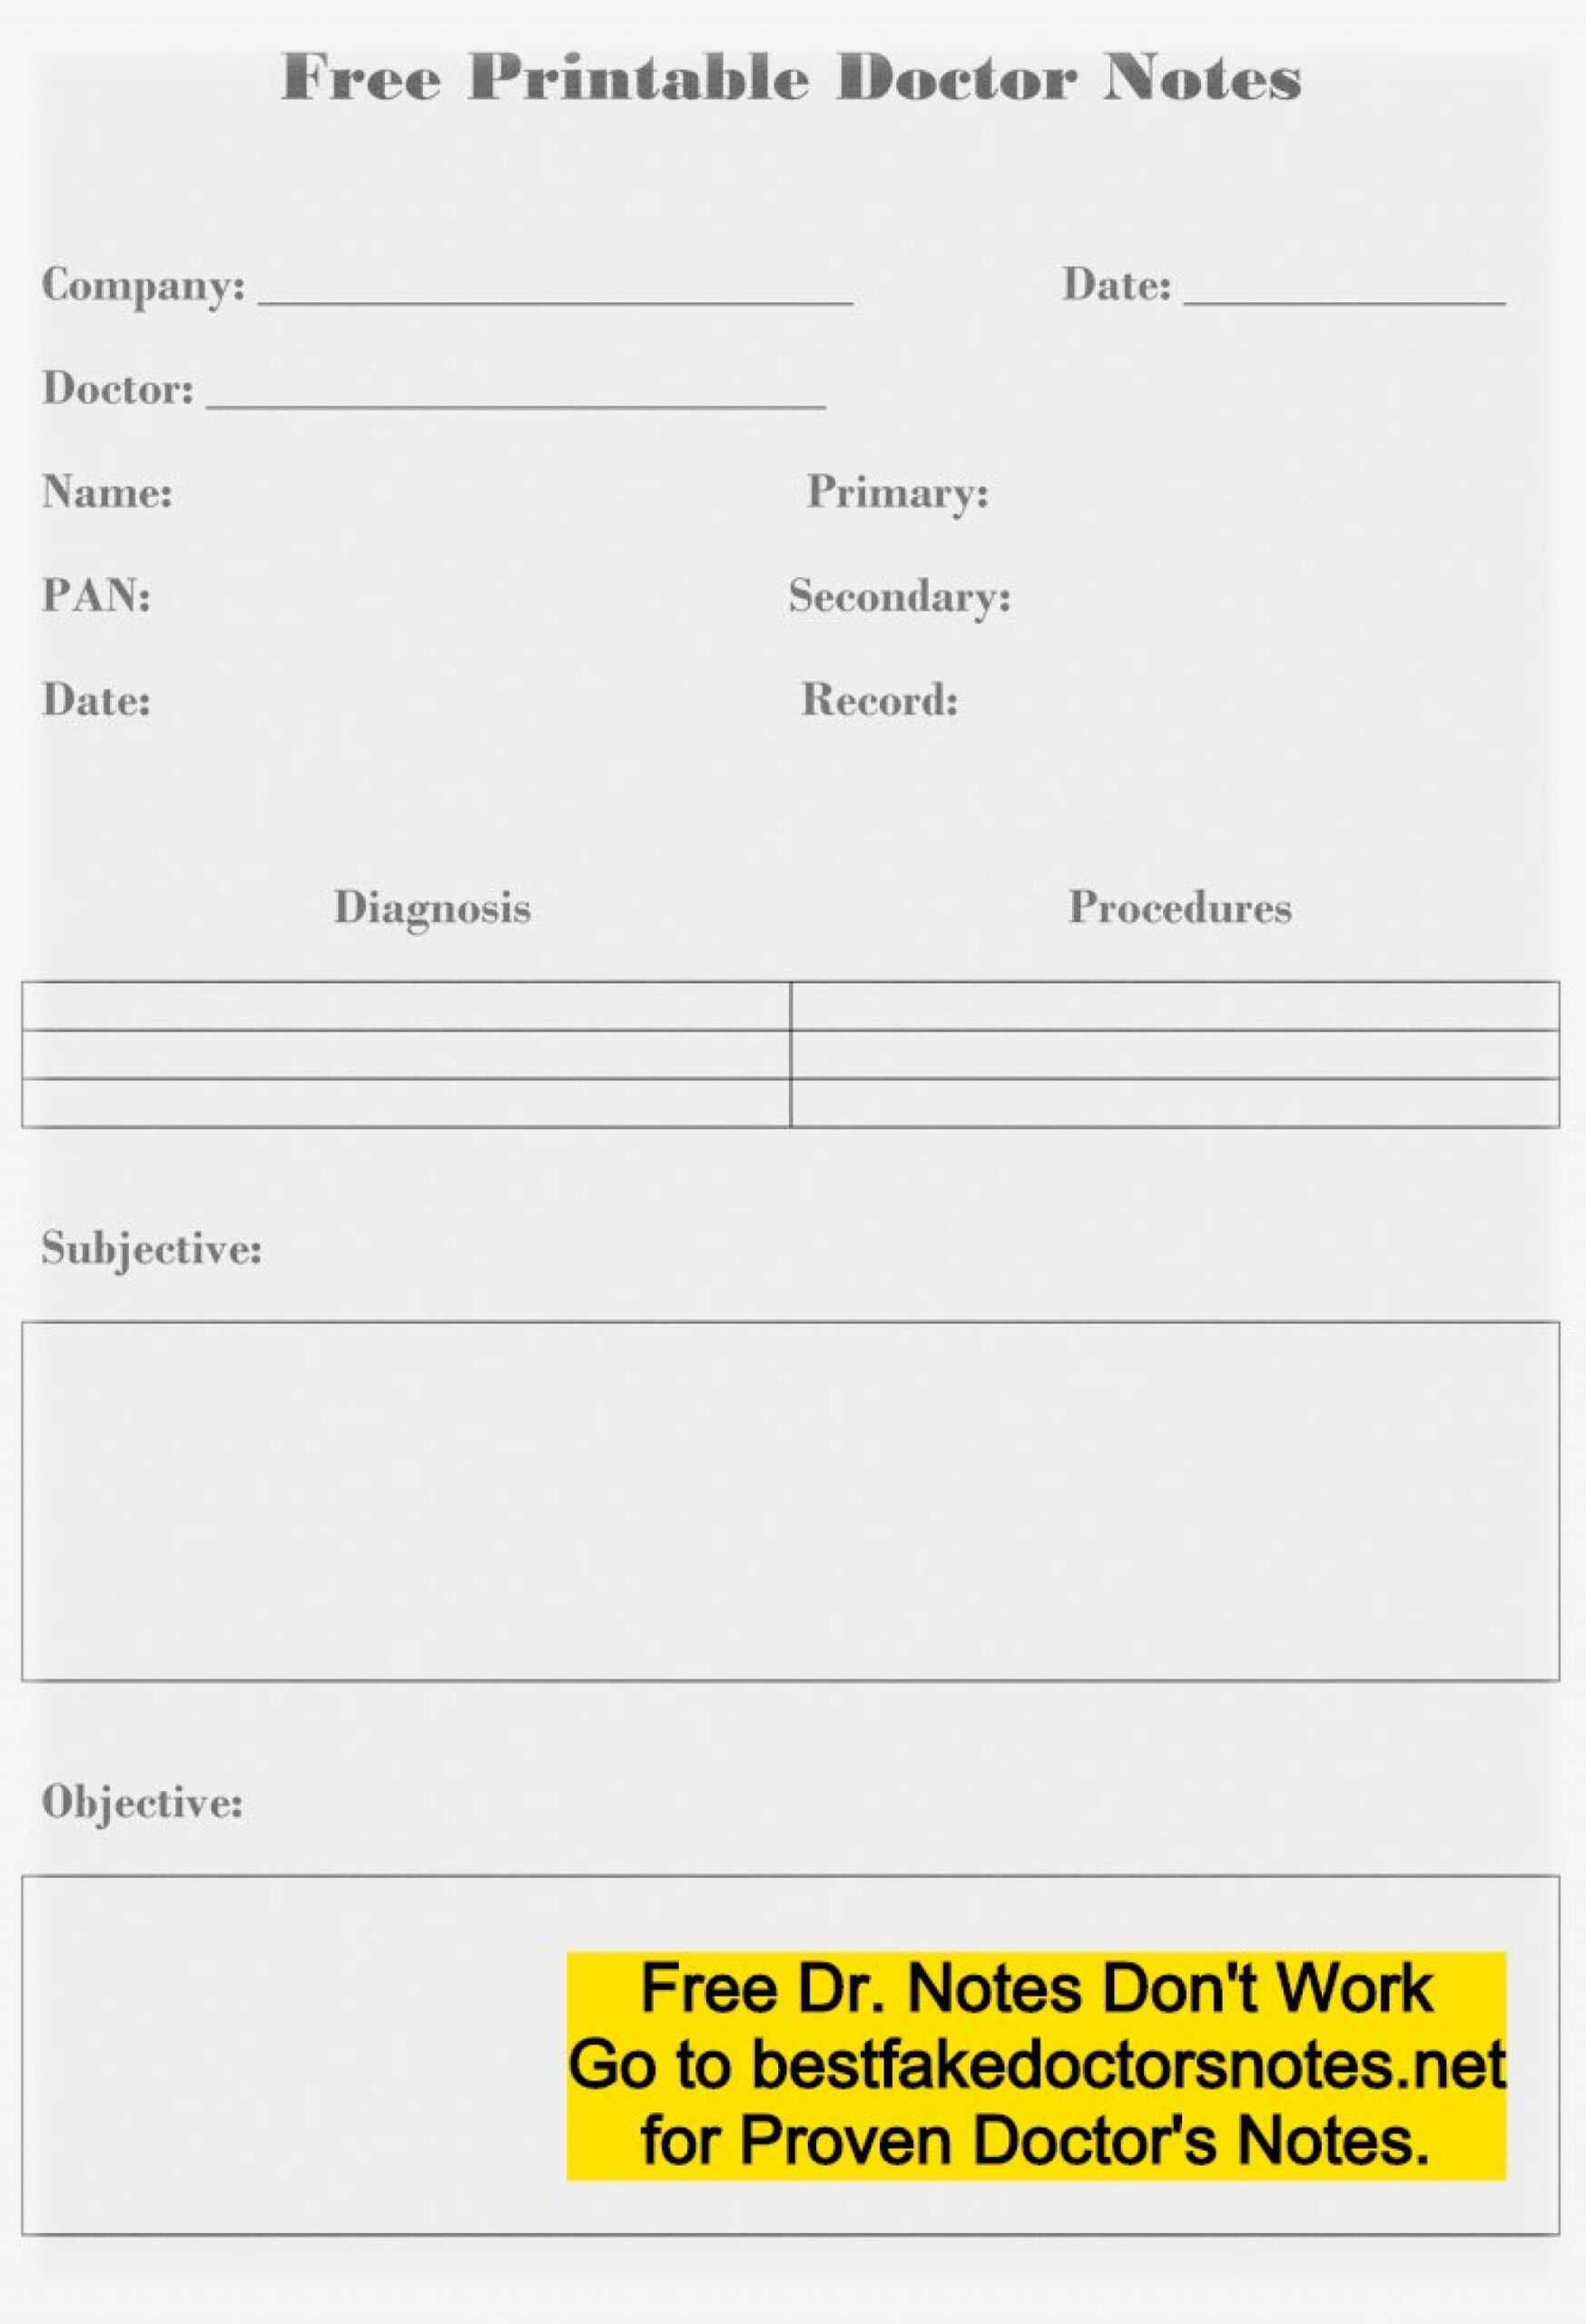 Singular Doctors Note Template Free Download Ideas Fake Within Dr Notes Templates Free